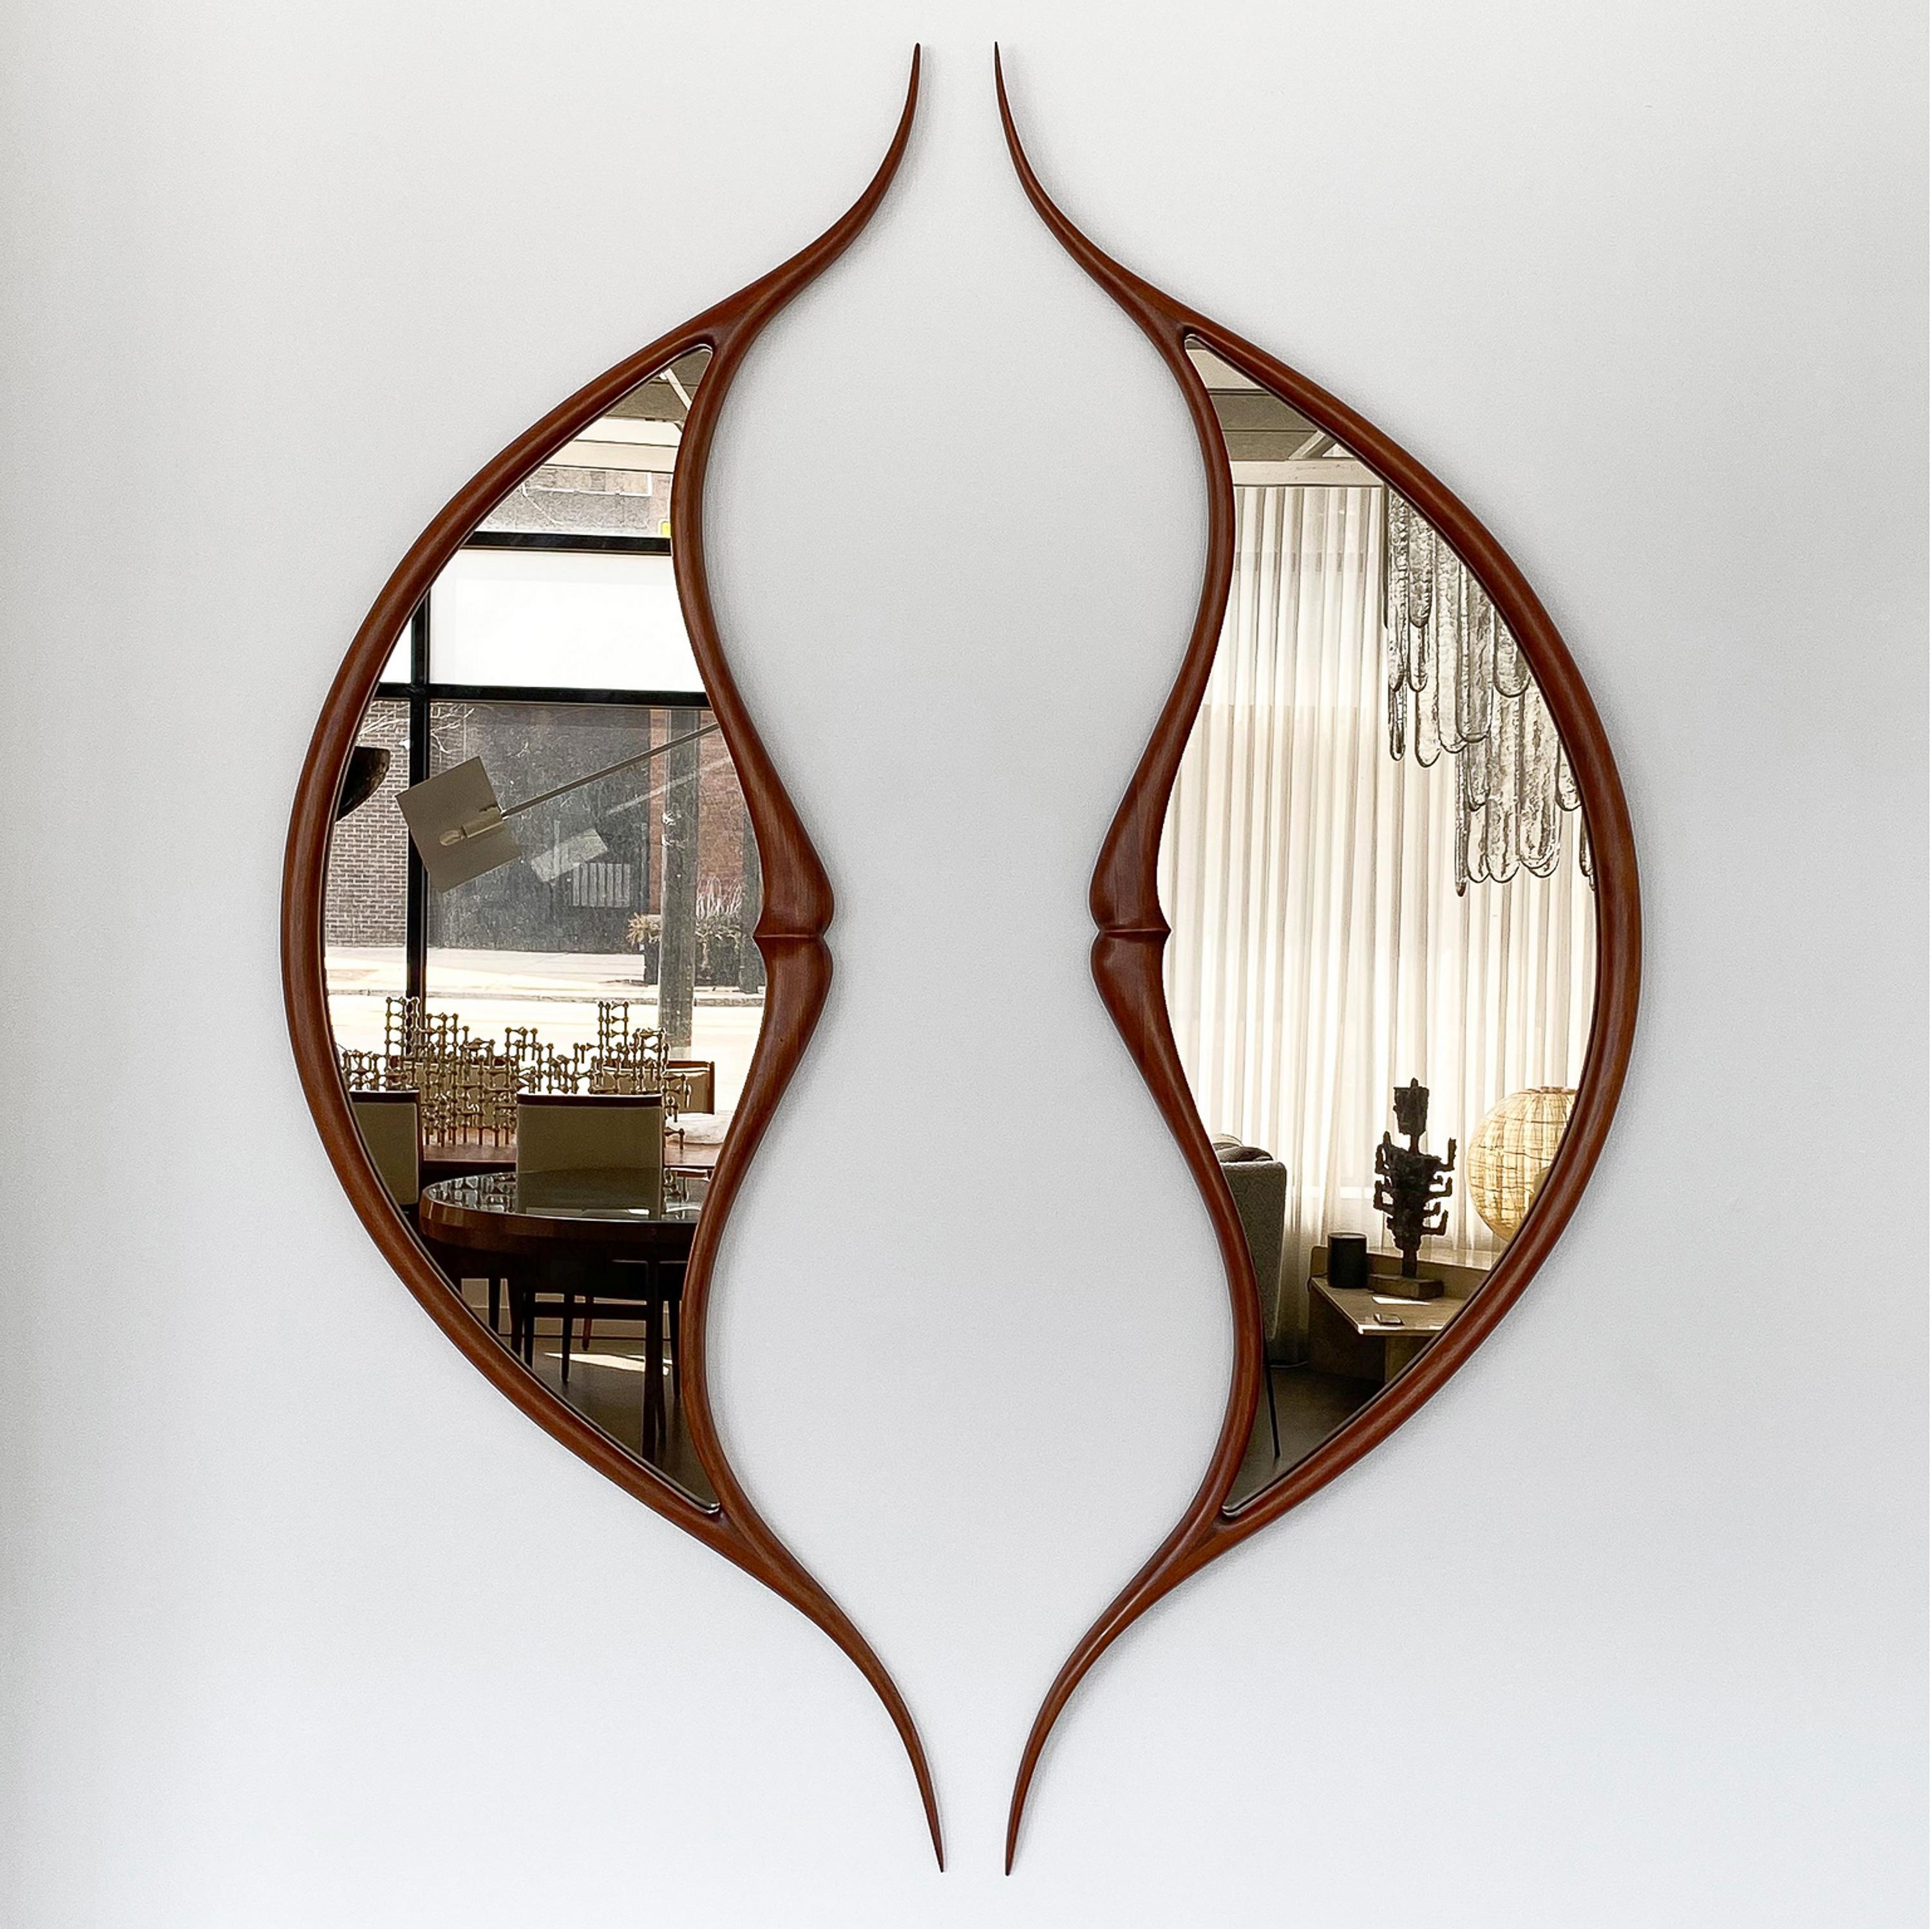 These stunning large wall mirrors are emblematic of the American Studio Craft Movement, showcasing the unique talent of sculptor Mark Levin, USA circa 1970s. Each piece of this pair stands as a testament to the artistry and vision that marked this